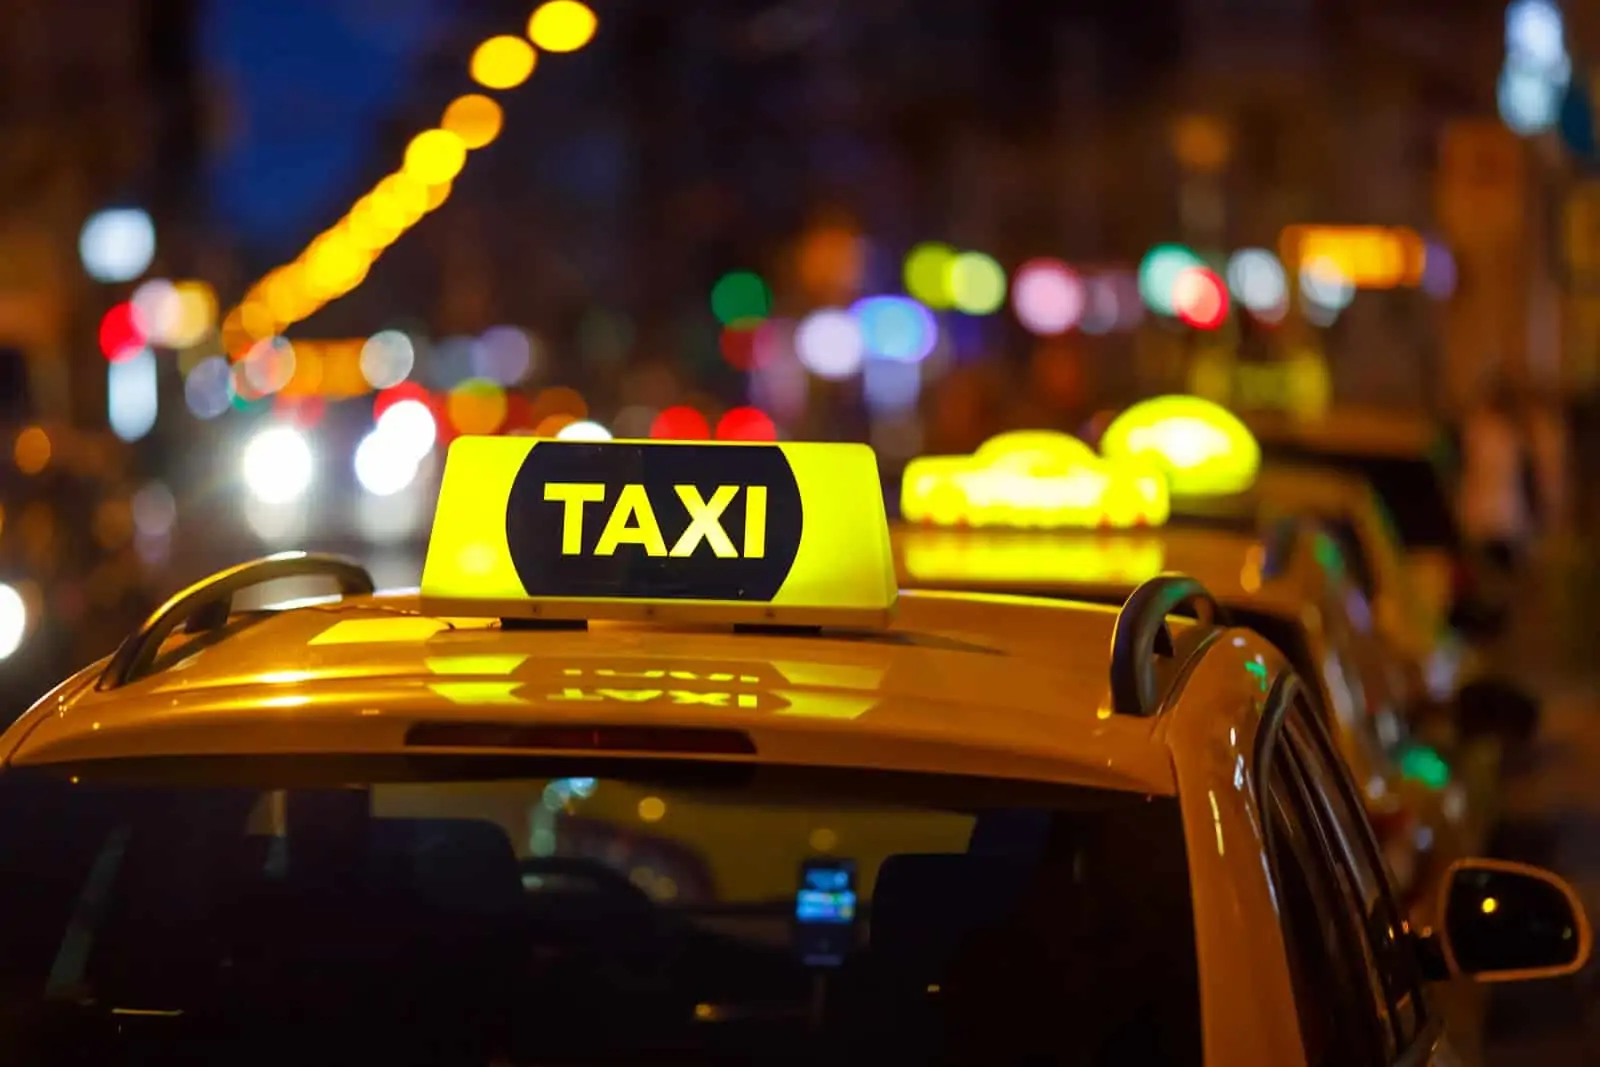 Curb promo code: A taxi sign lit up on the car's roof